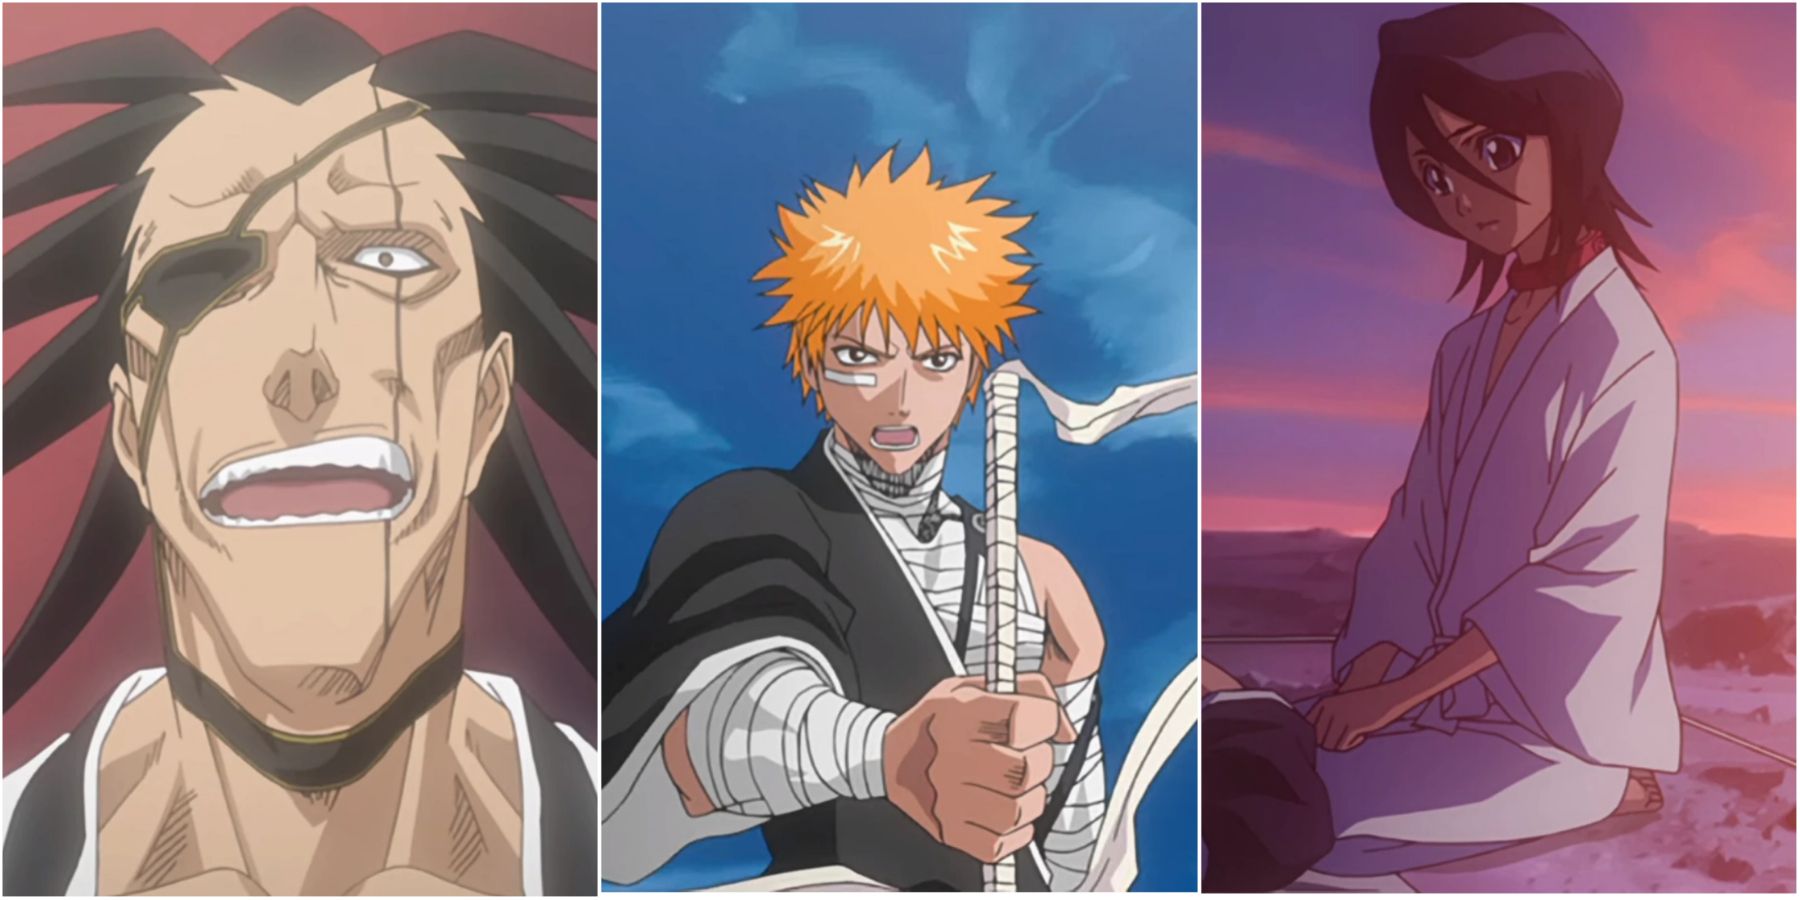 BLEACH: Why Was the Soul Society Arc so Special?